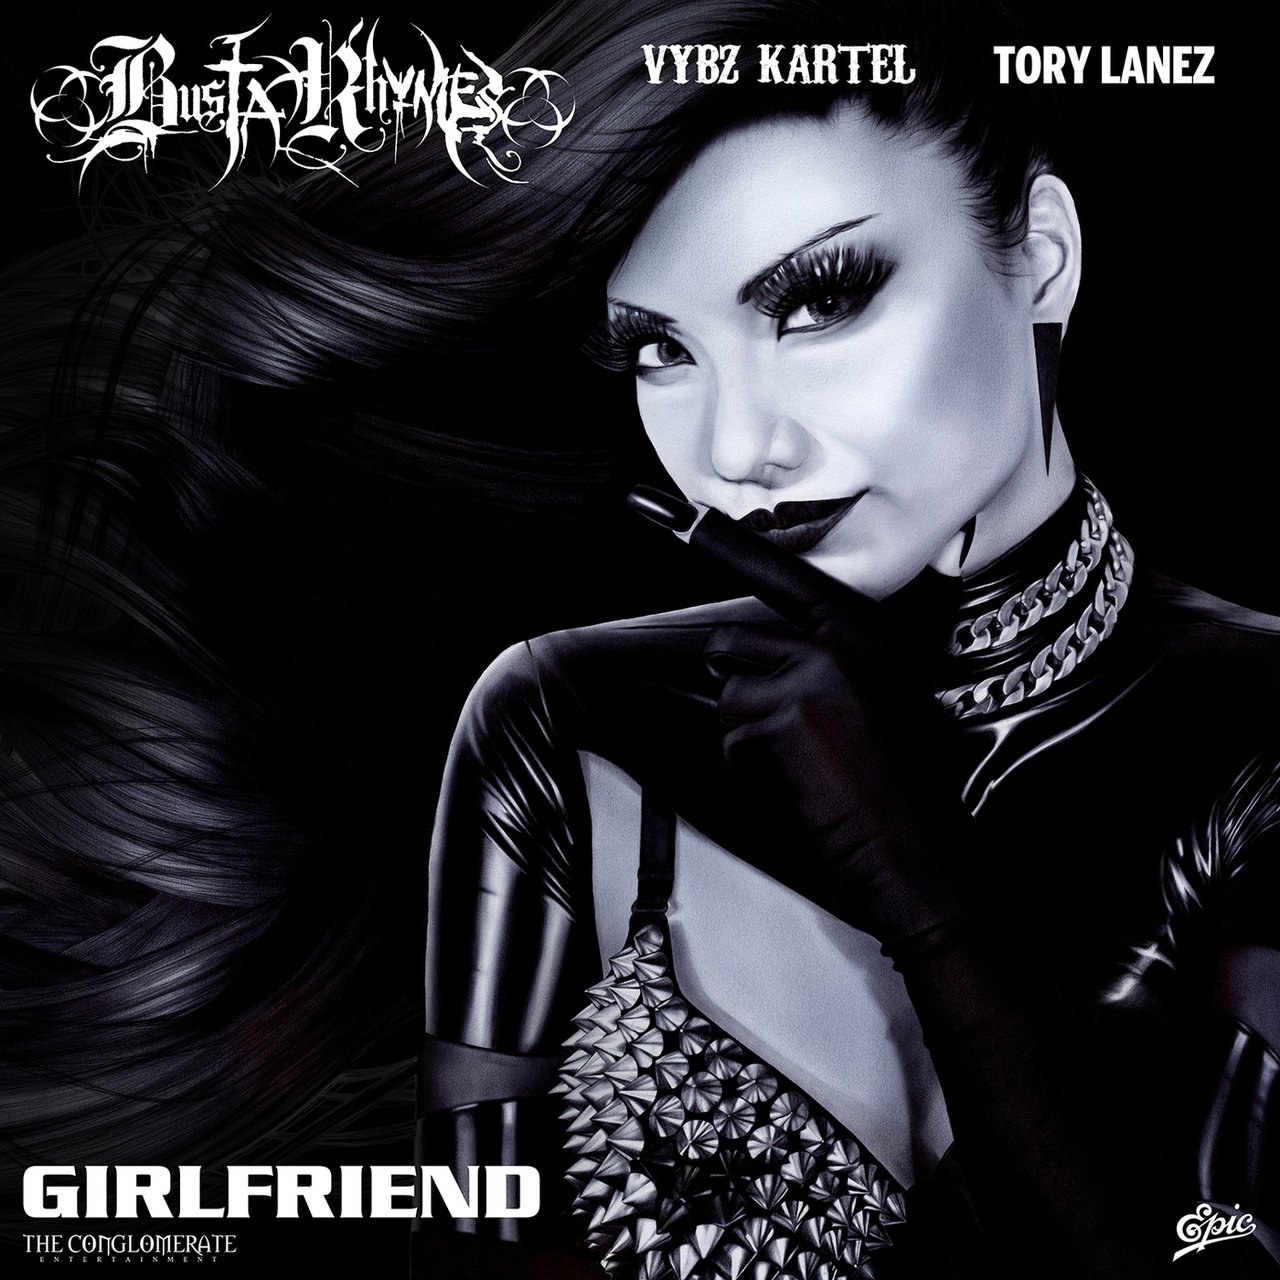 Busta Rhymes - Girlfriend (ft. Vybz Kartel and Tory Lanez) (Cover)